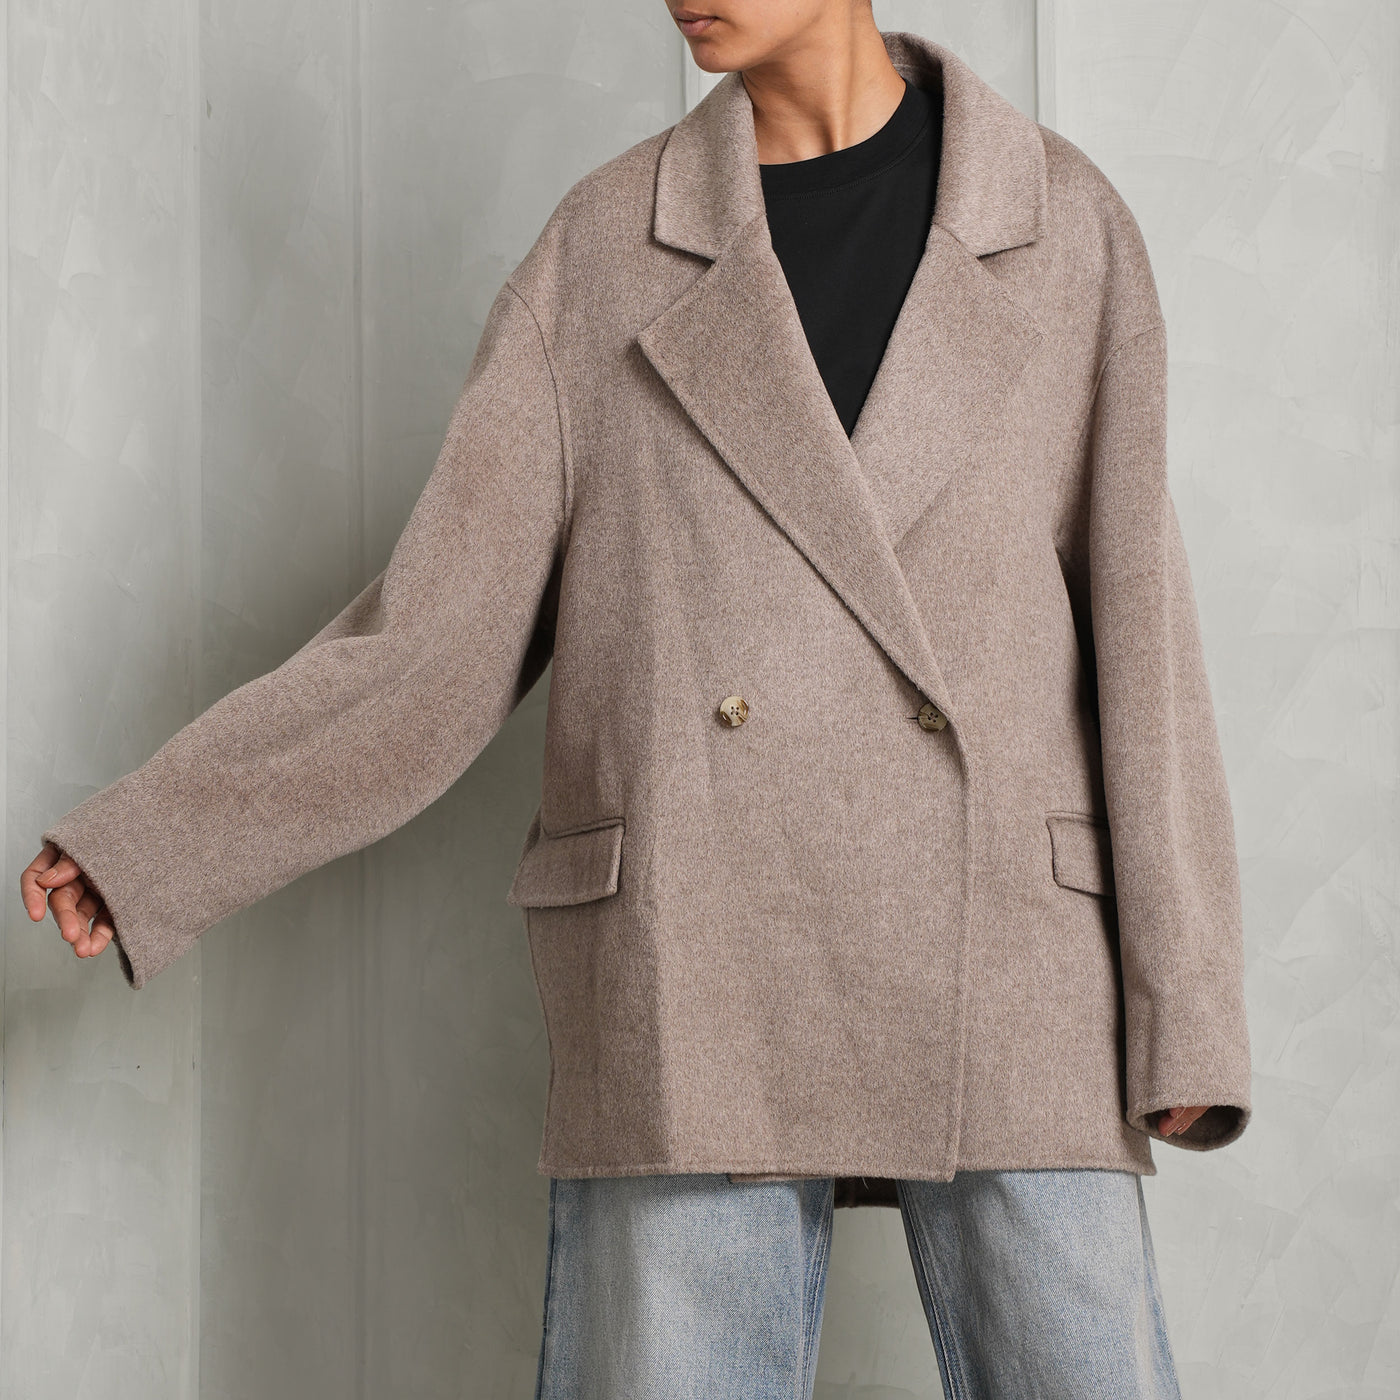 LOULOU STUDIO Beige Lina Pea Coat with dropped shoulders